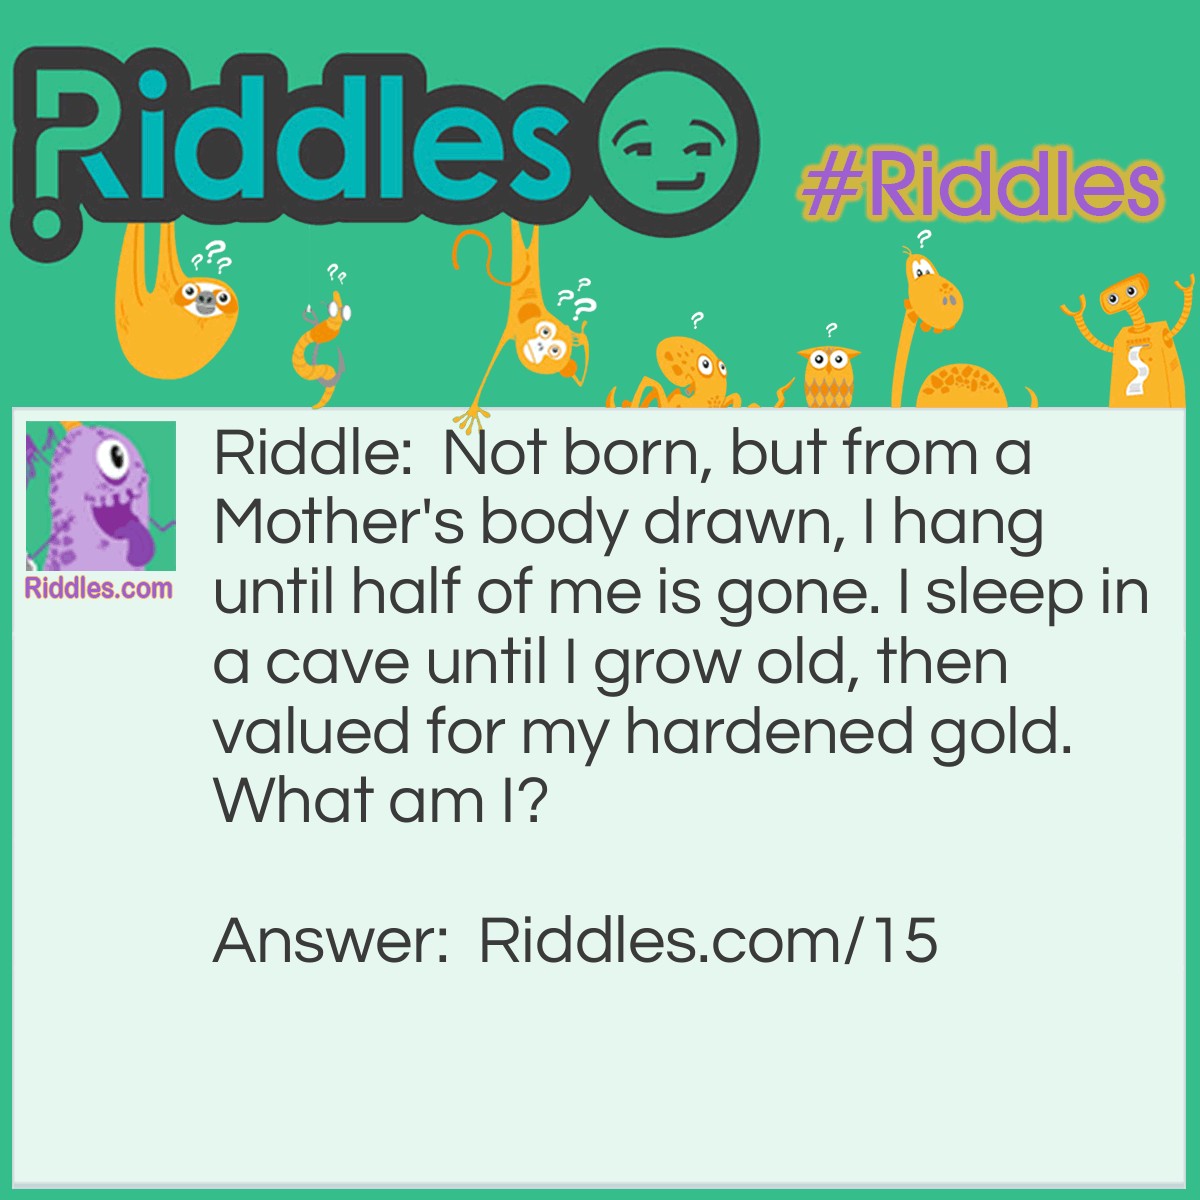 Riddle: Not born, but from a Mother's body drawn, I hang until half of me is gone. I sleep in a cave until I grow old, then valued for my hardened gold. What am I? Answer: Cheese.